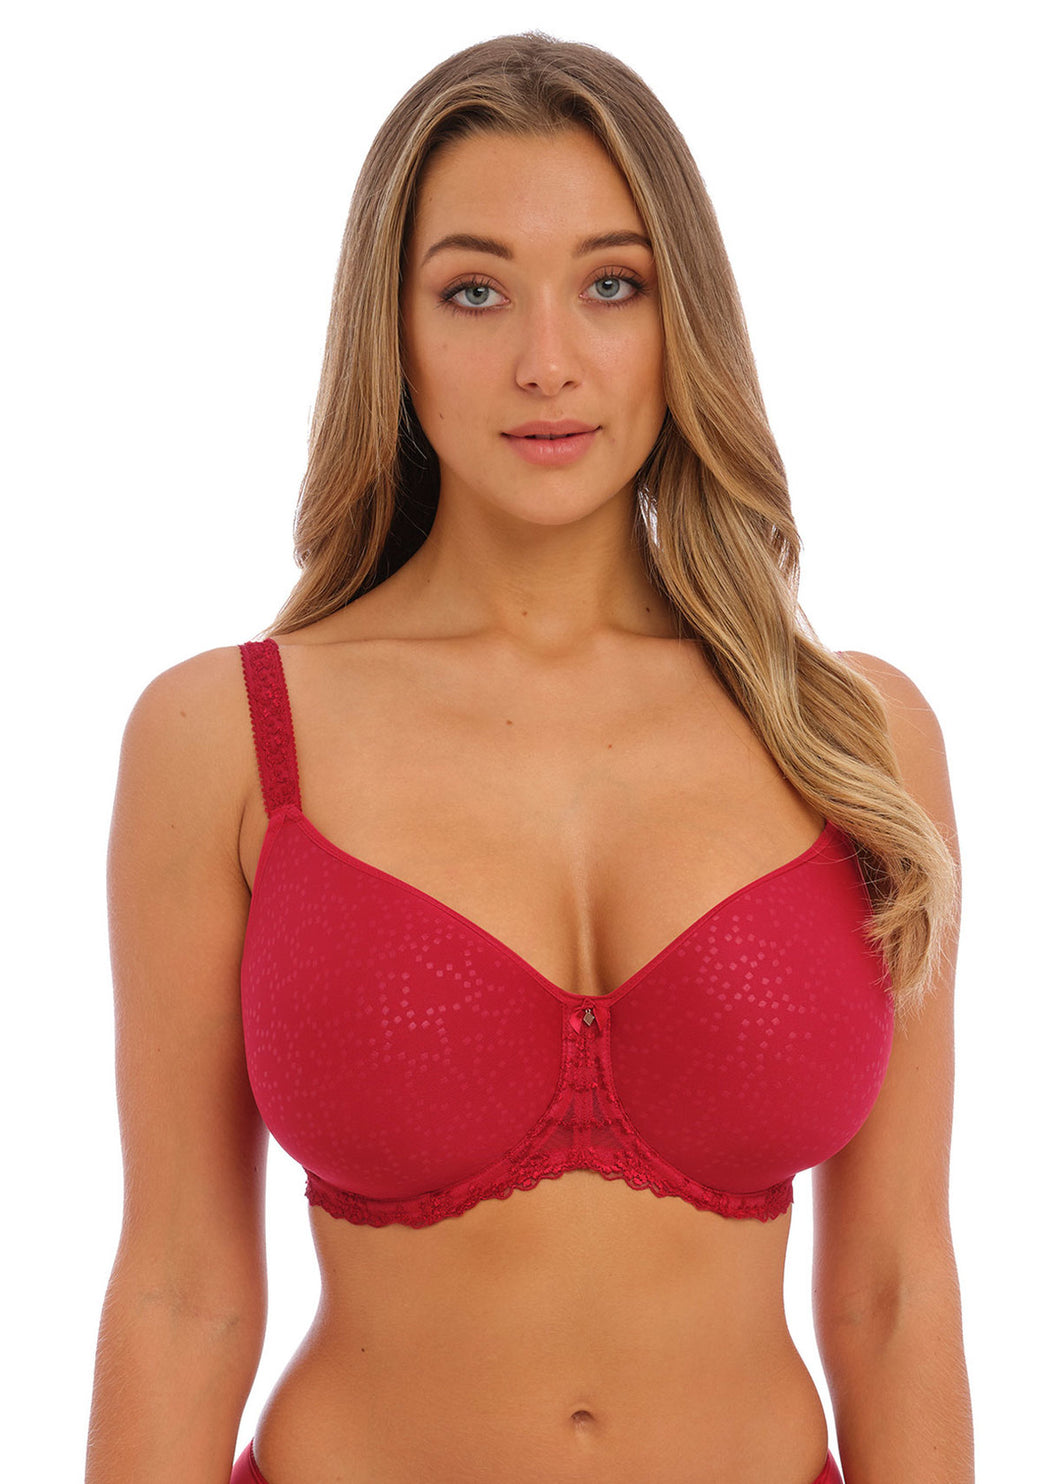 Fantasie Women's Rebecca Lace Underwired Spacer Full Cup Bra, Sand